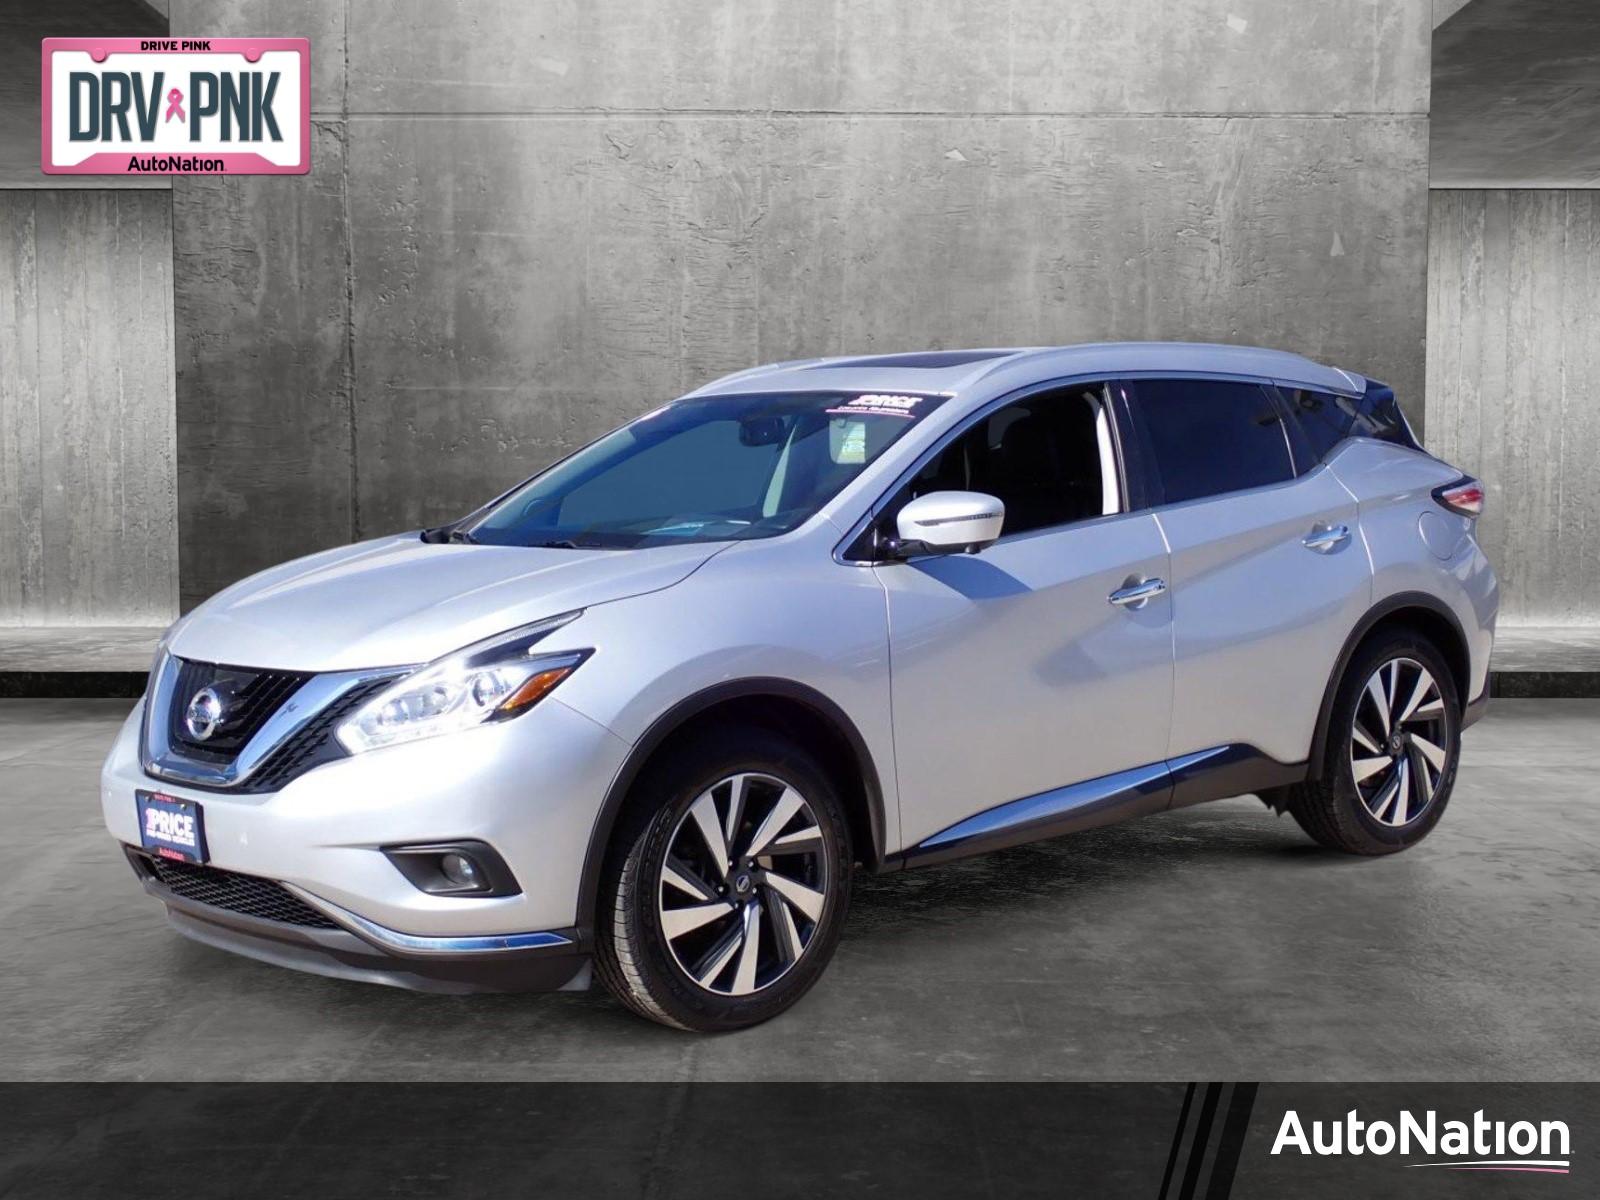 2016 Nissan Murano Vehicle Photo in DENVER, CO 80221-3610